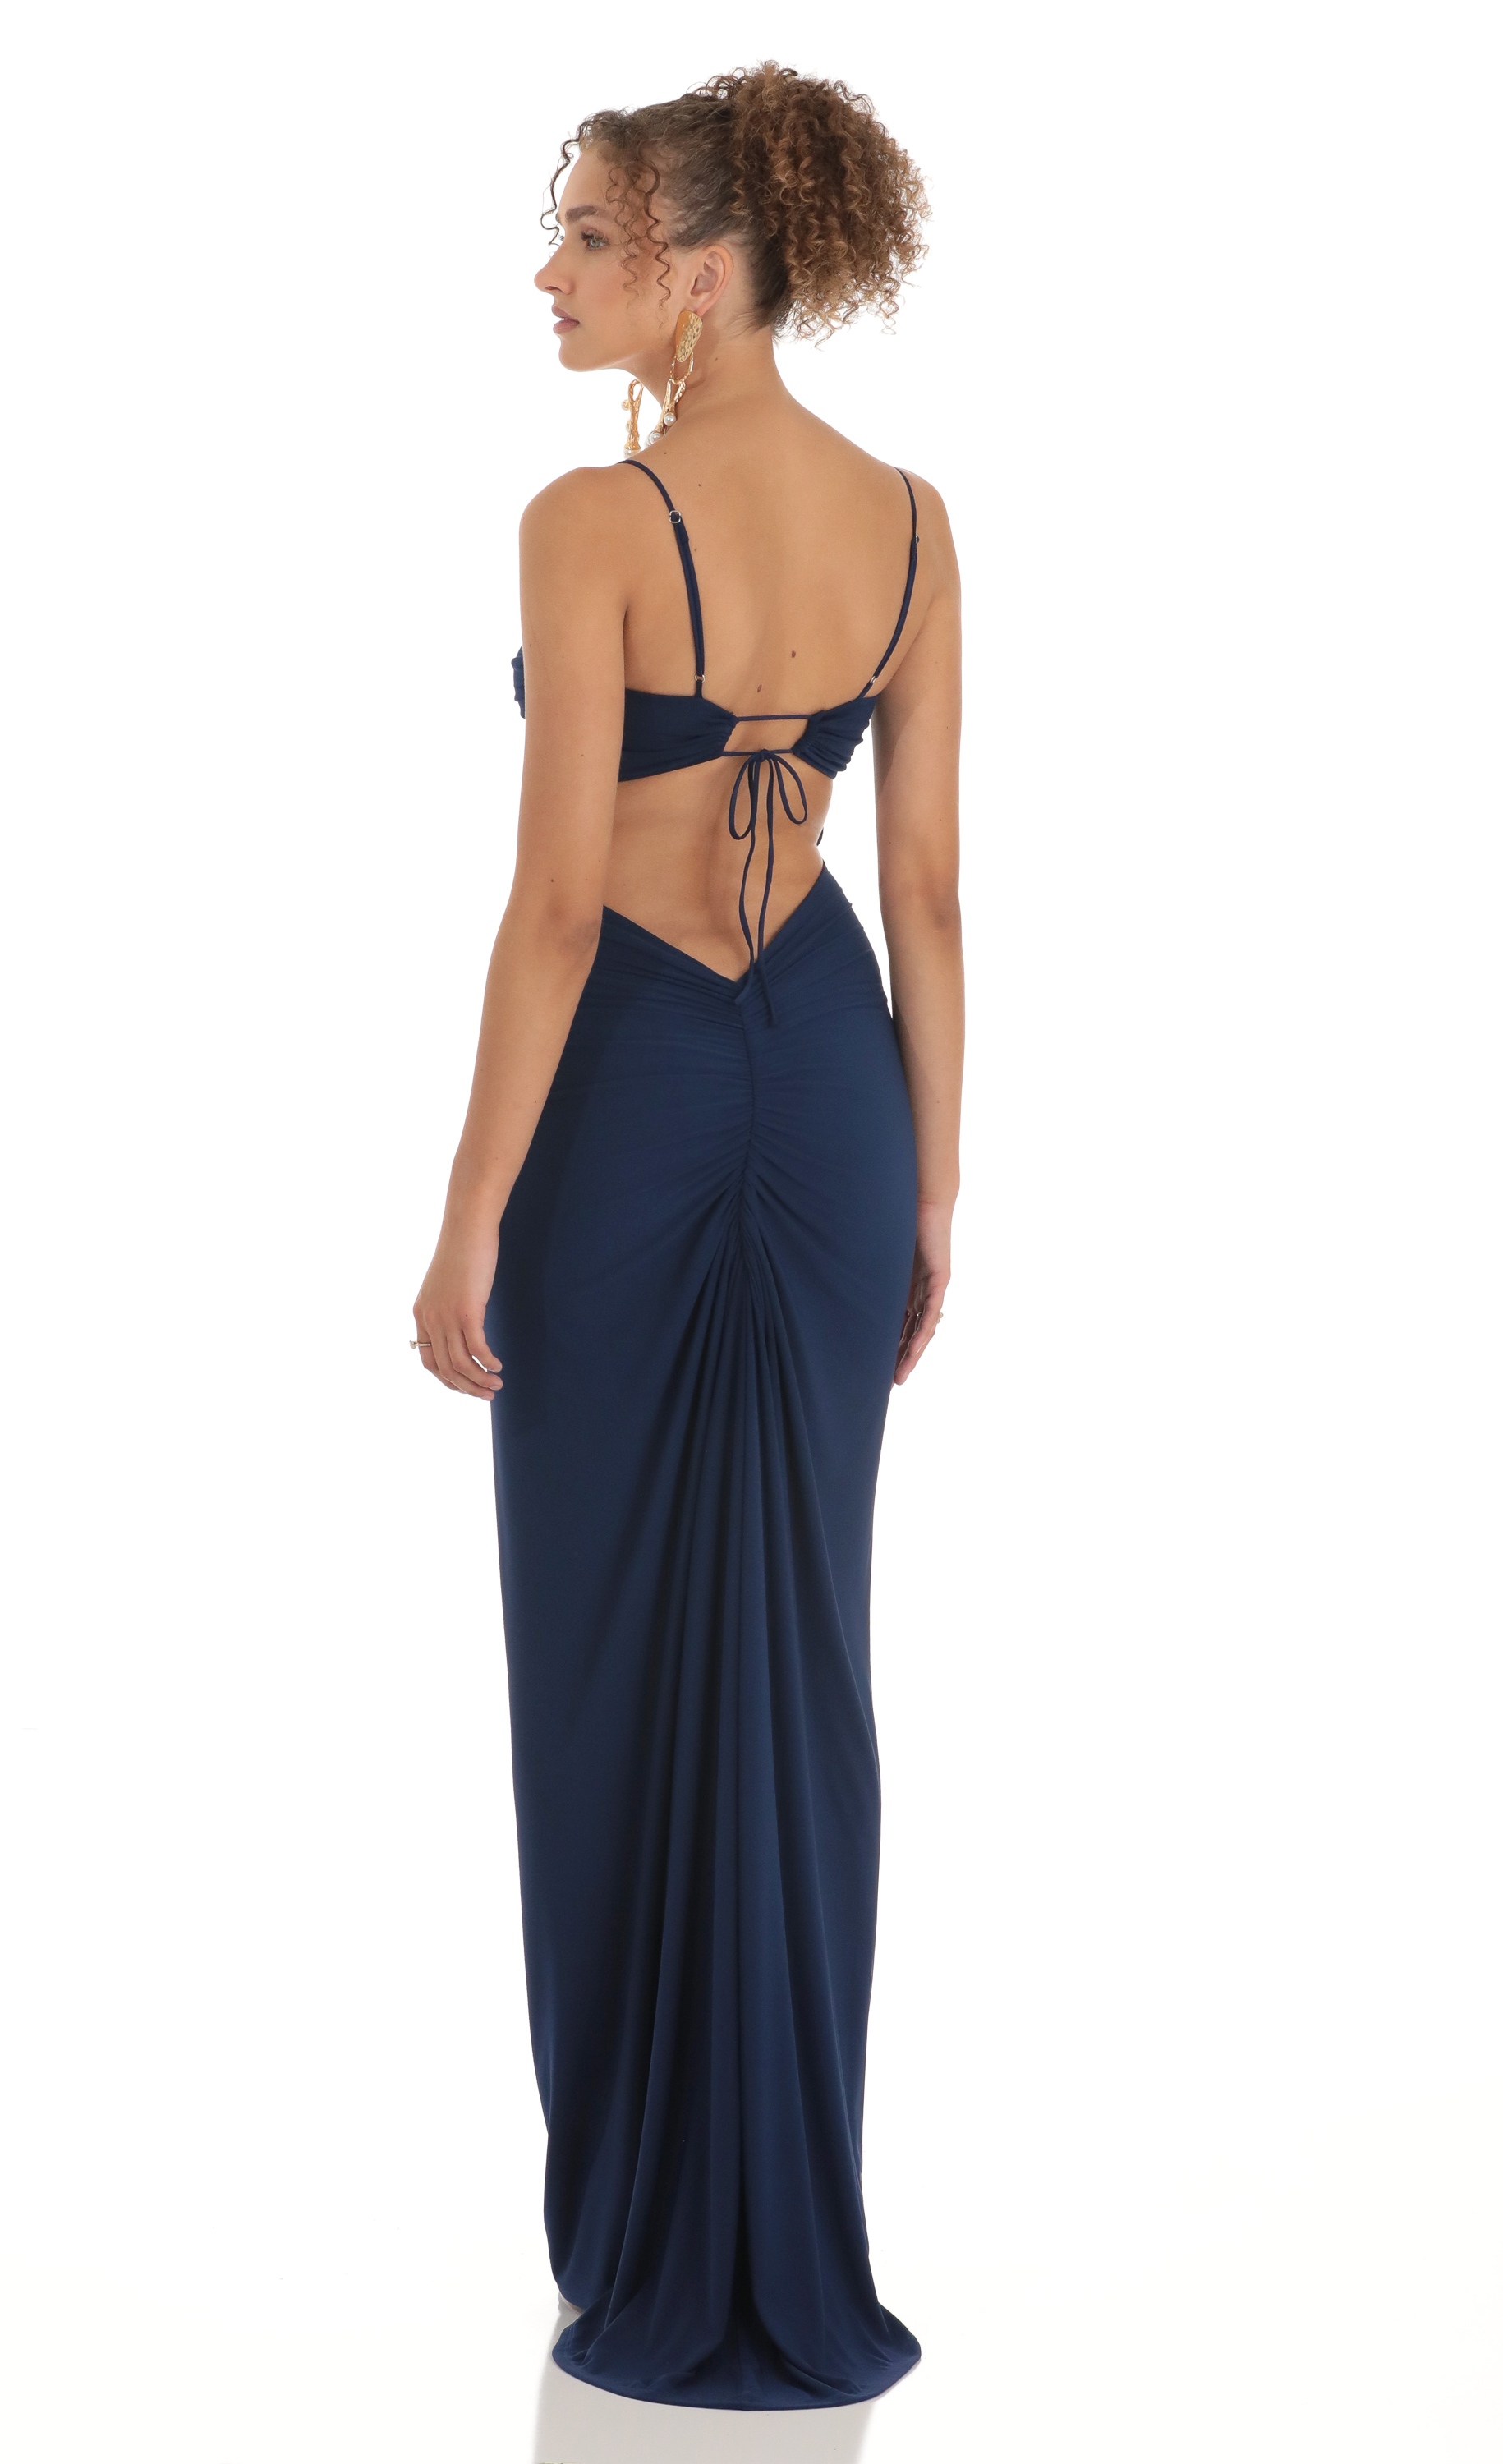 Ruched Maxi Dress in Navy